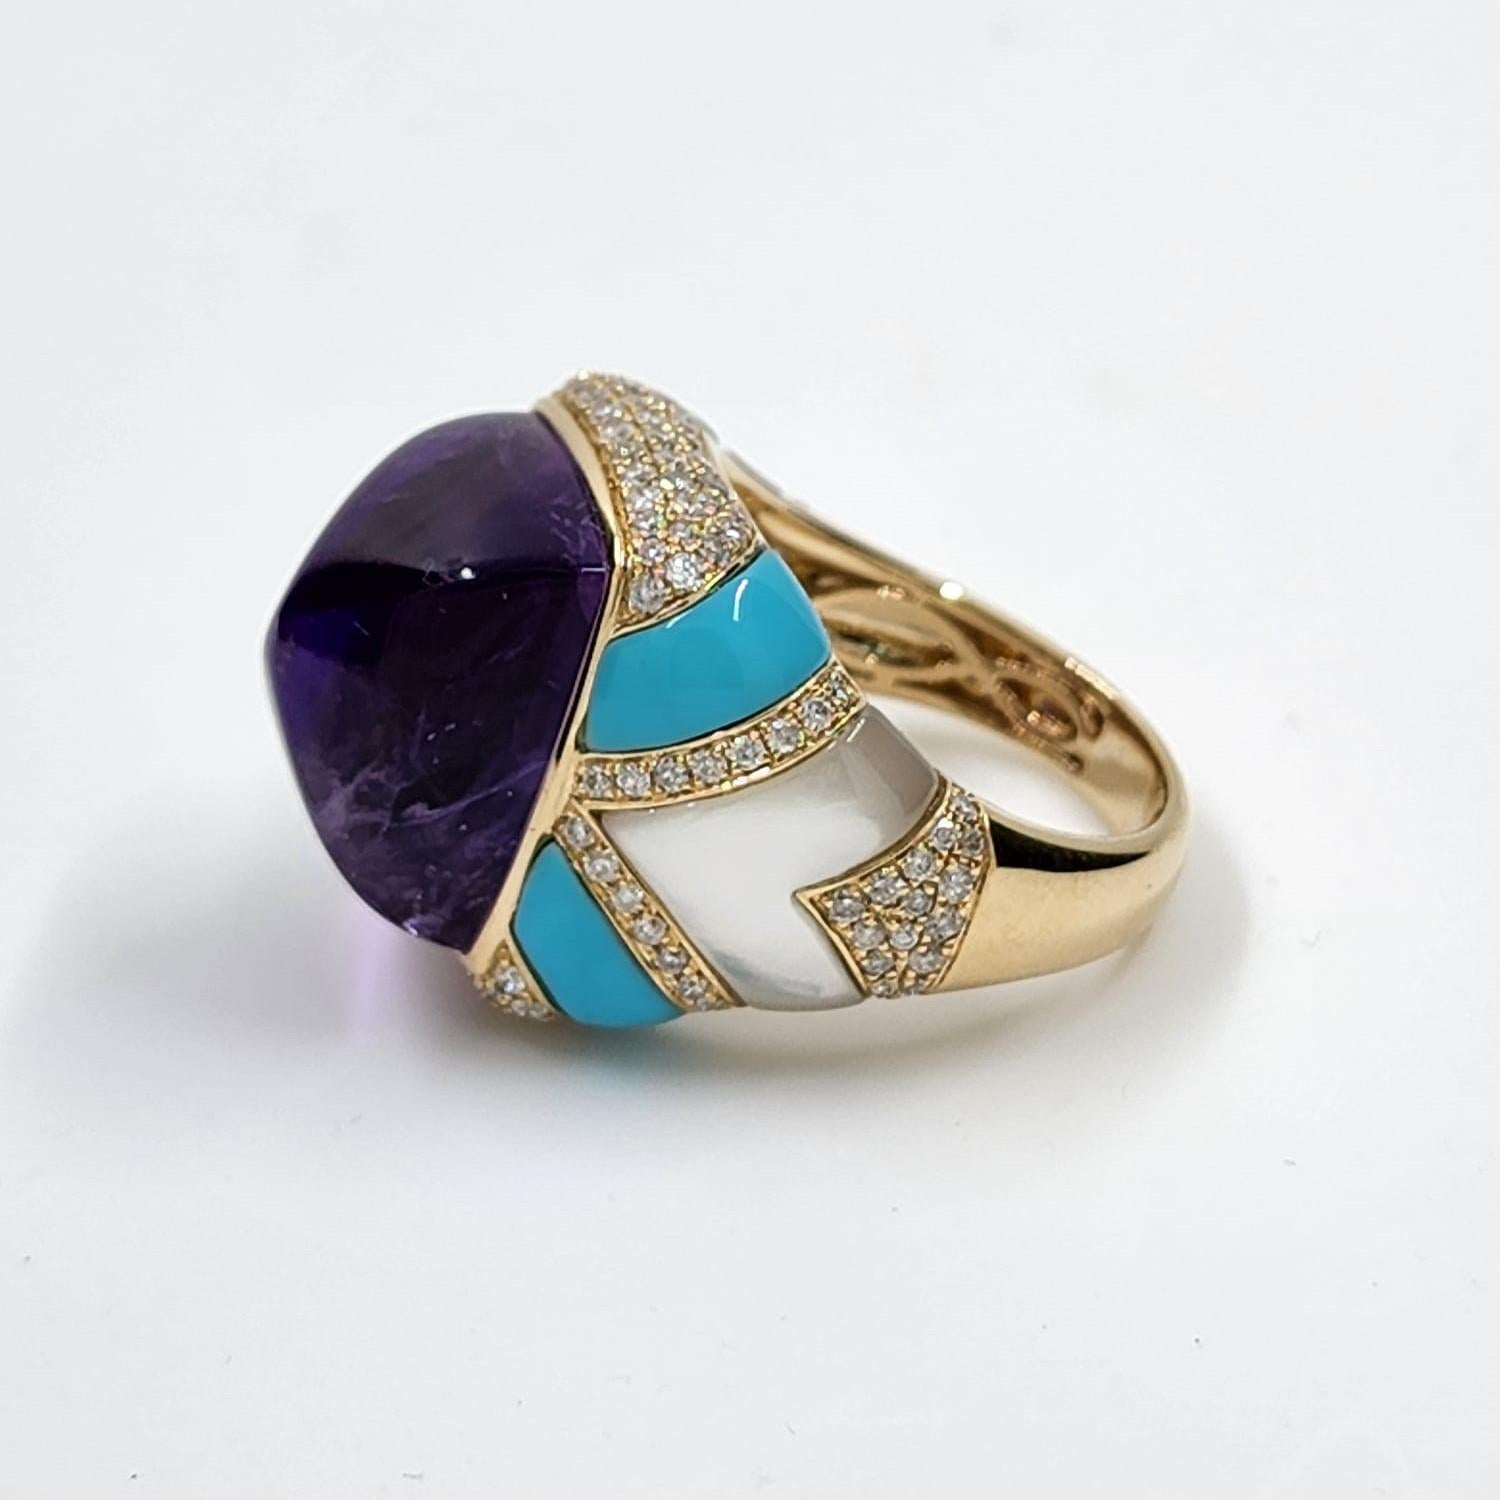 Cabochon 15.36 Carat Amethyst Diamond Turquoise Cocktail Ring in 14 Karat Yellow Gold For Sale